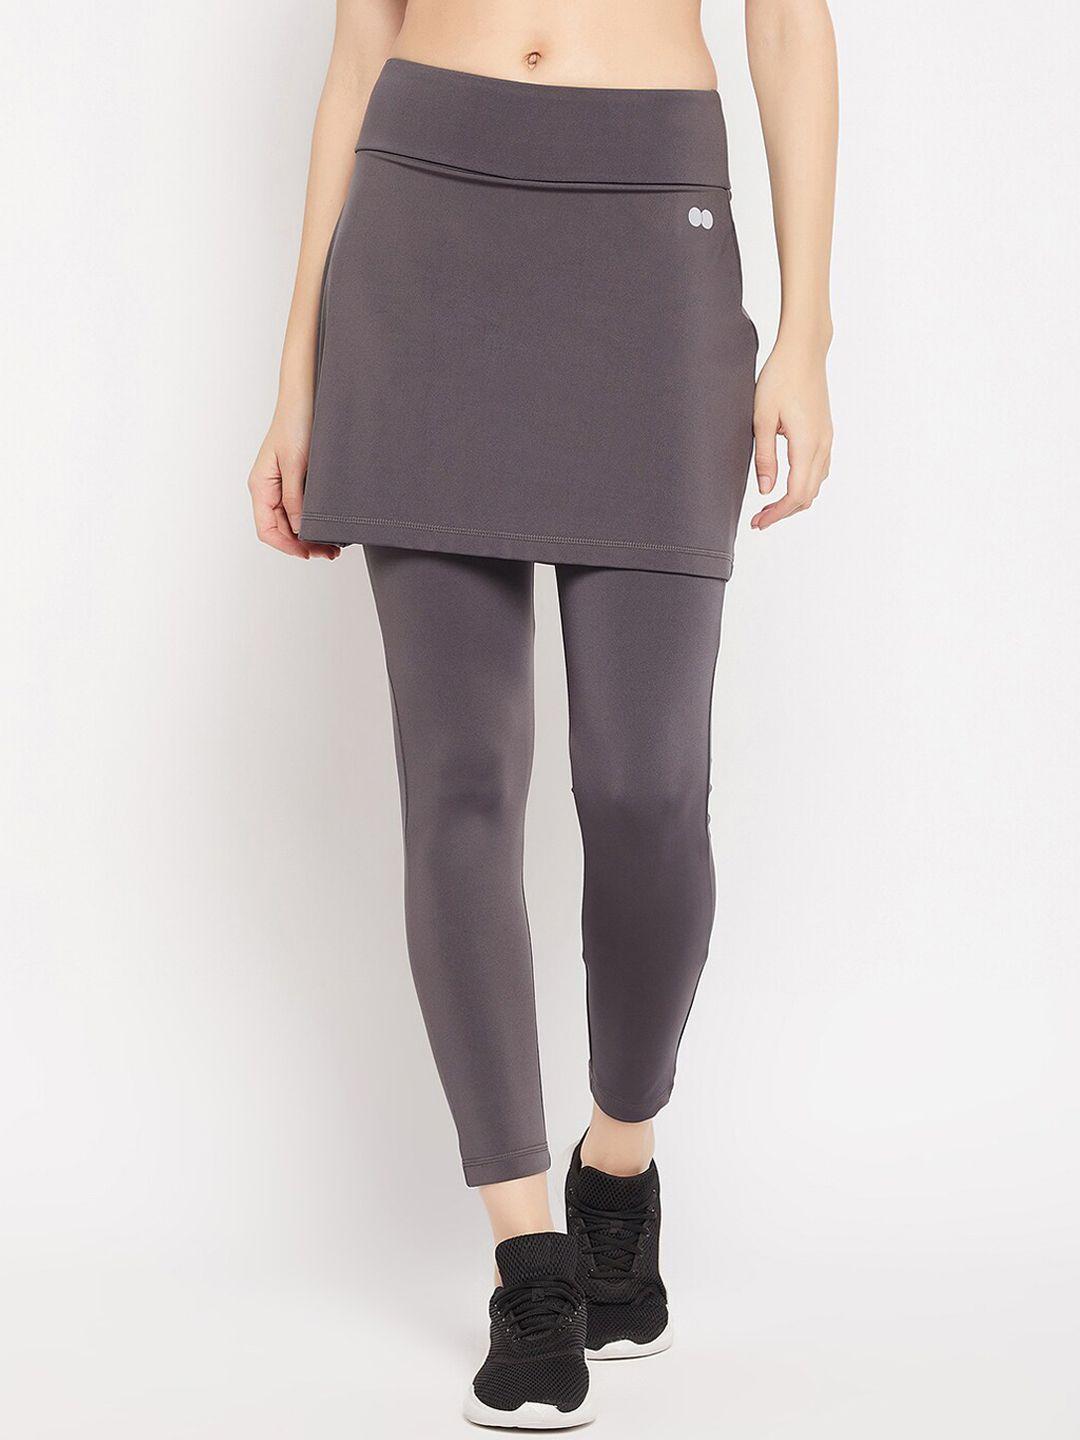 clovia snug-fit high rise active skirt rapid dry with attached tights